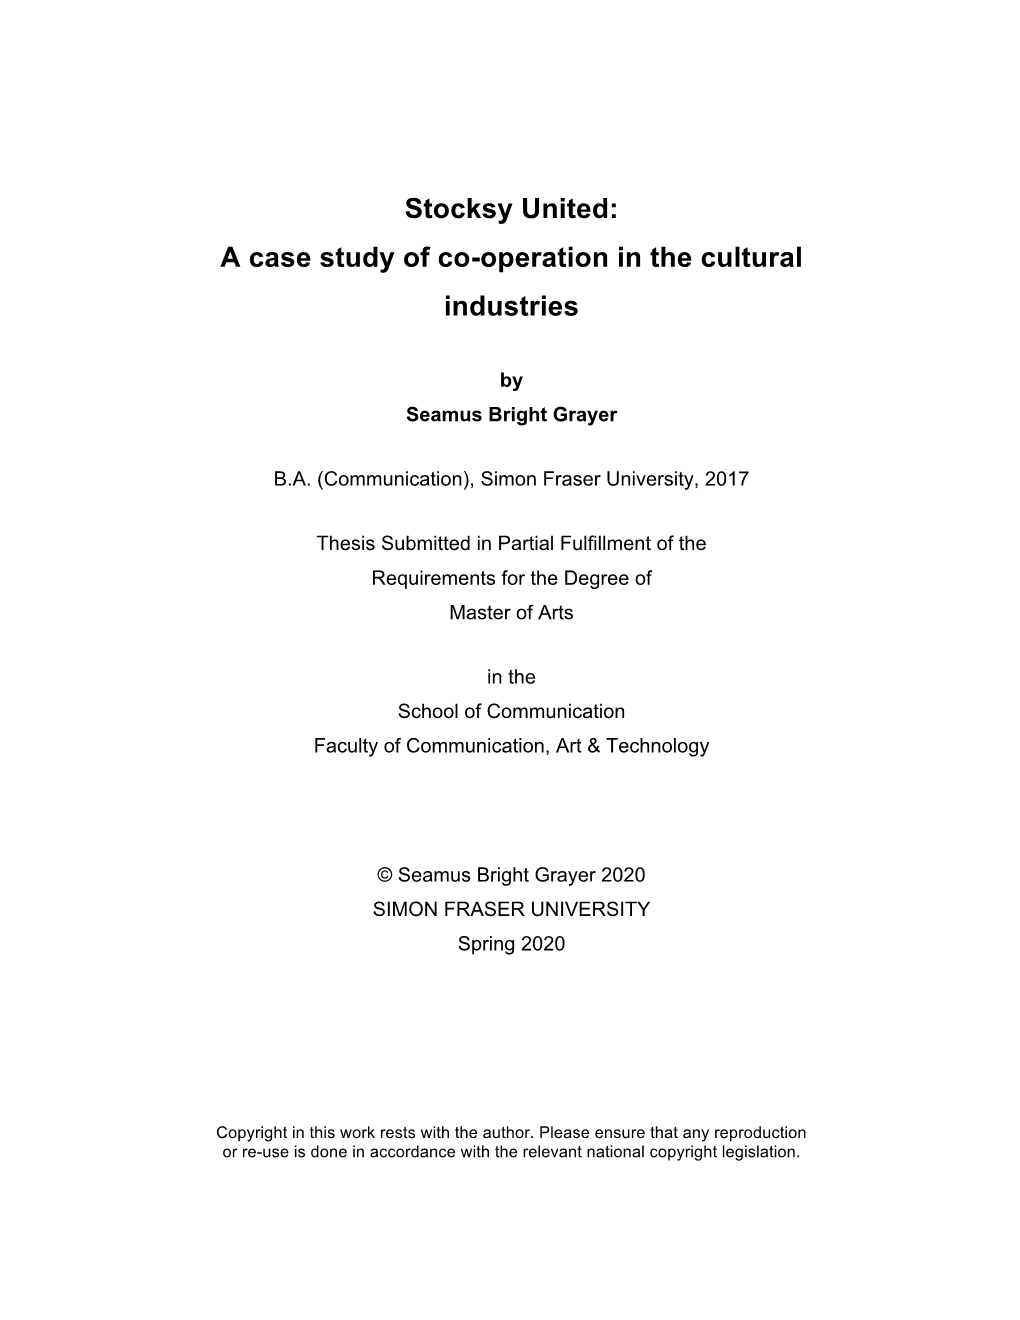 Stocksy United: a Case Study of Co-Operation in the Cultural Industries